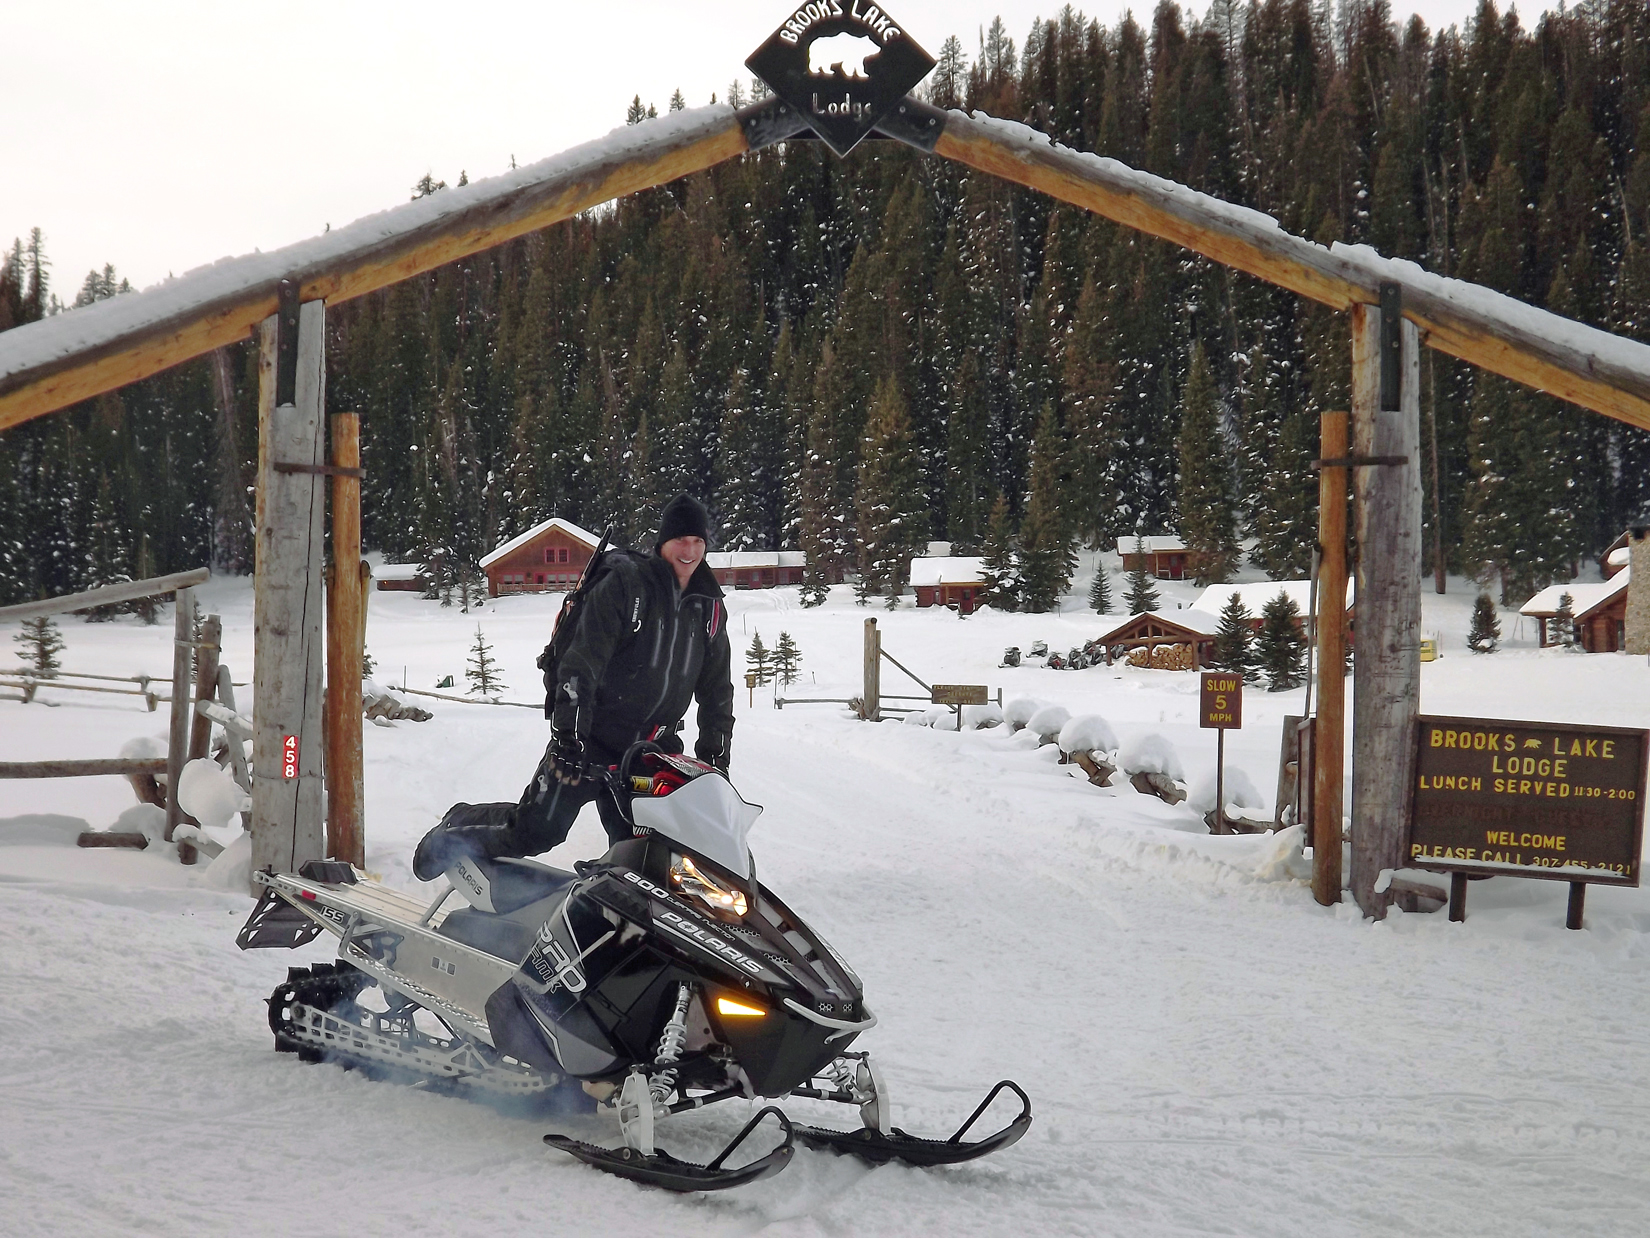 A hot spot for snowmobilers near Yellowstone and Jackson Hole, Brooks Lake Lodge boasts the finest sleds – plus two million acres of snowy terrain for winter guests to explore.